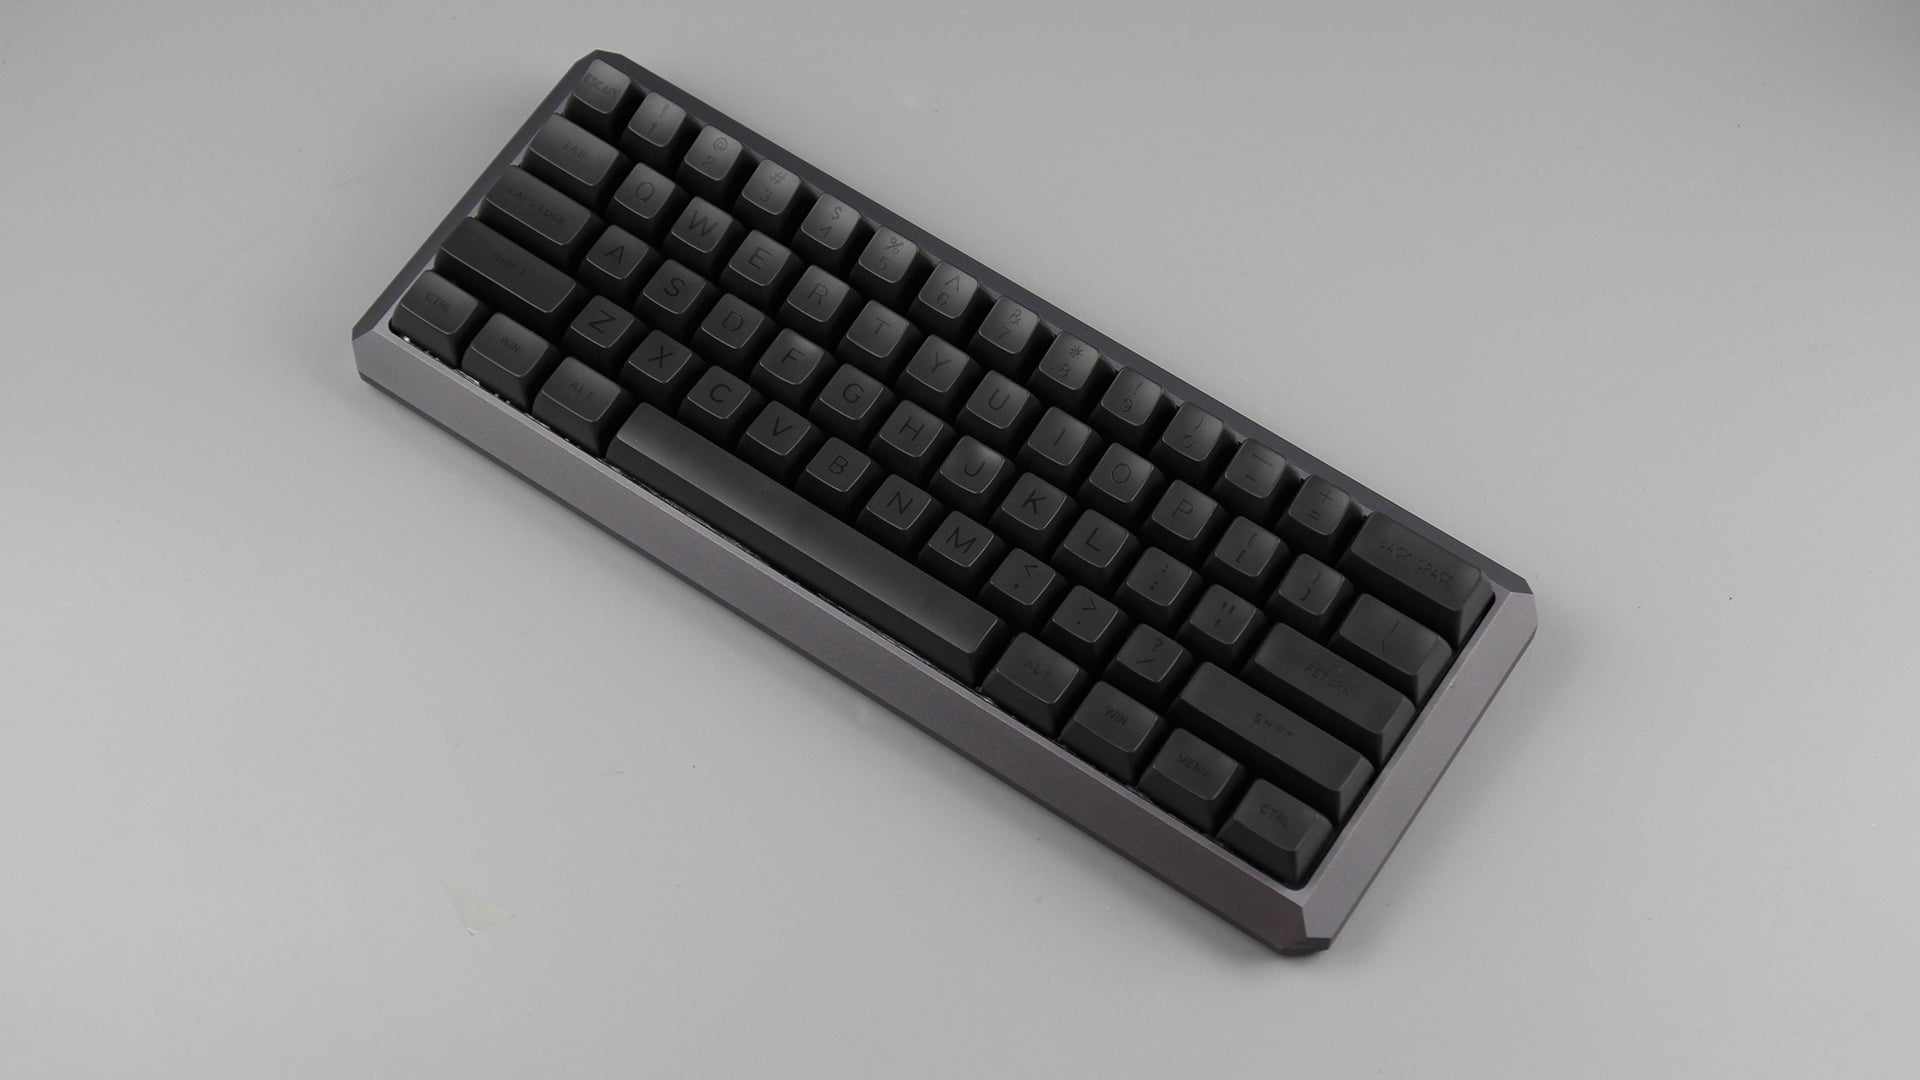 GB]KBDfans 5° 60% case ---All orders are